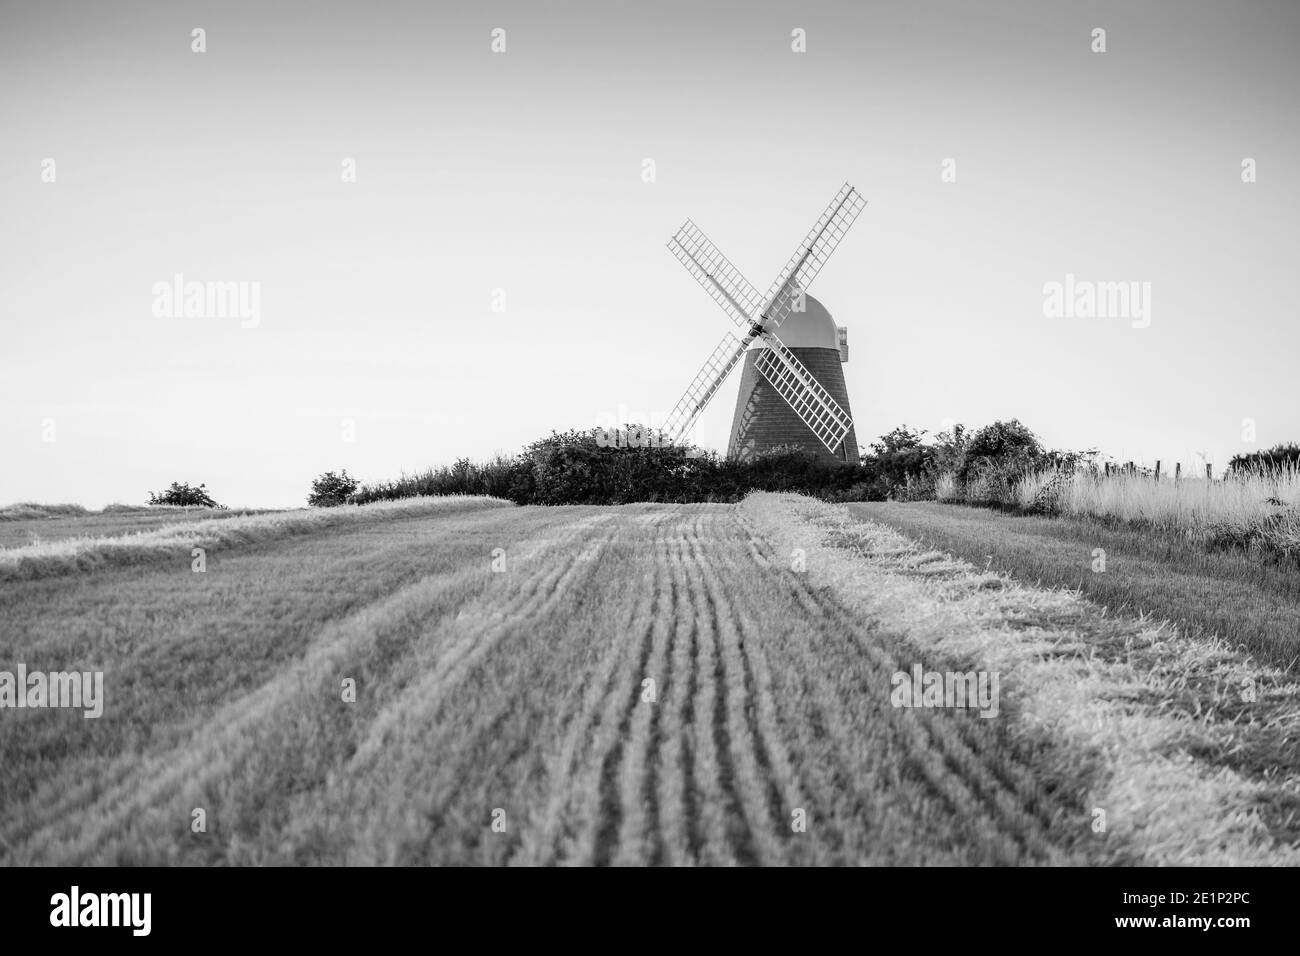 Halnaker Windmill in black and white / monochrome on top of Halnaker Hill in West Sussex, England, UK Stock Photo